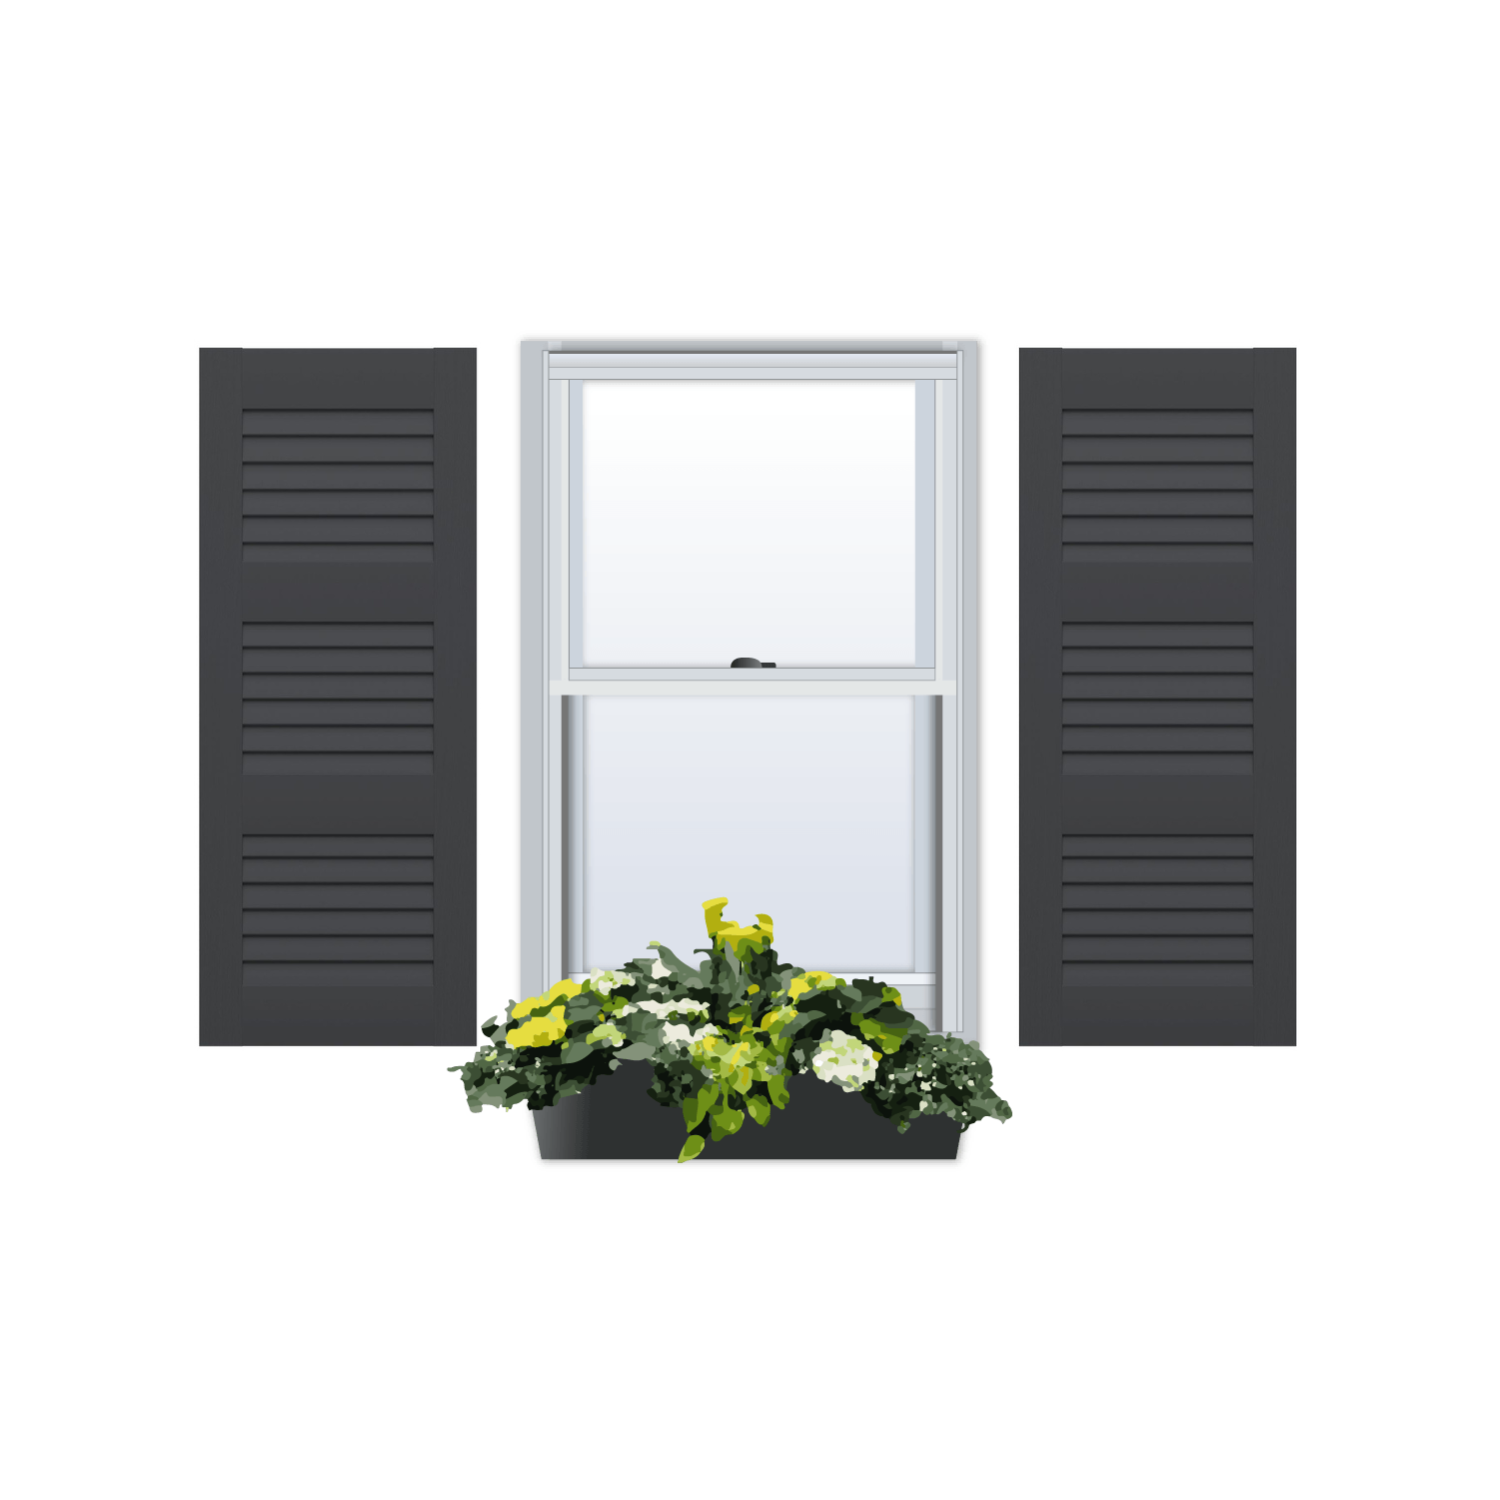 Vinyl | Louvered Exterior Shutters | Three Equal Sections | 1 Pair